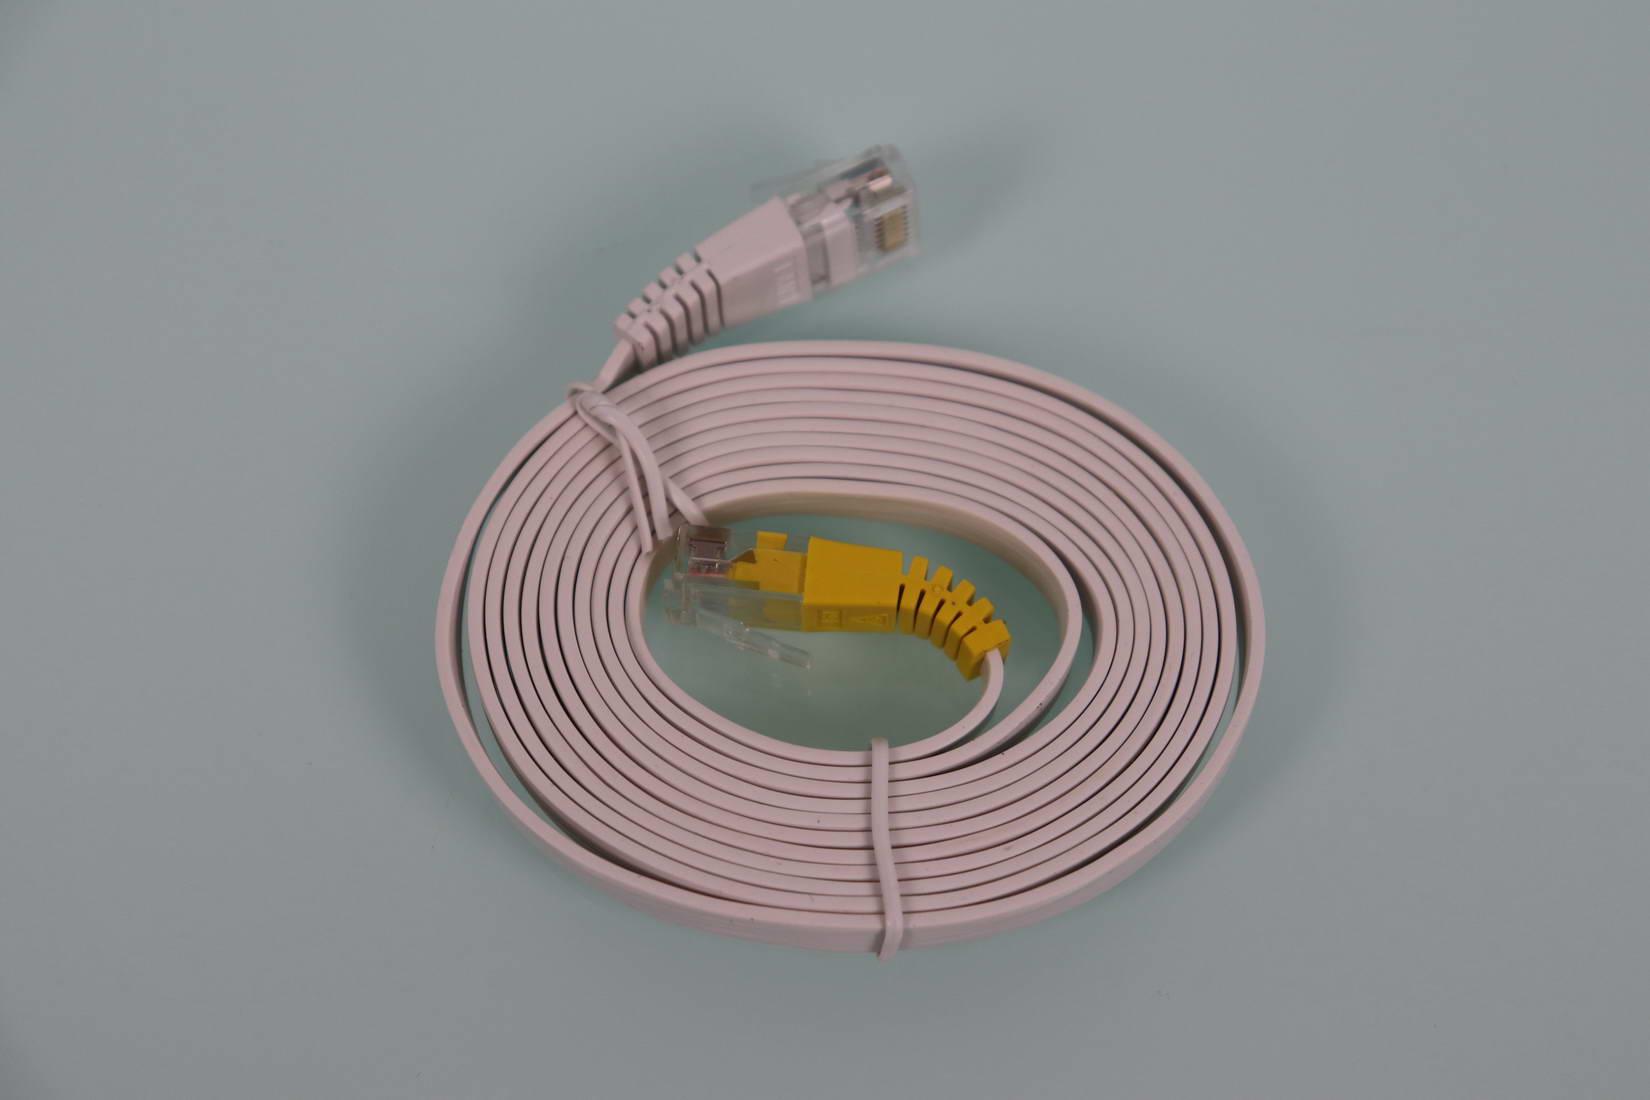 Cable de red Ethernet plano del AVM FRITZ!Repeater 1200 AX